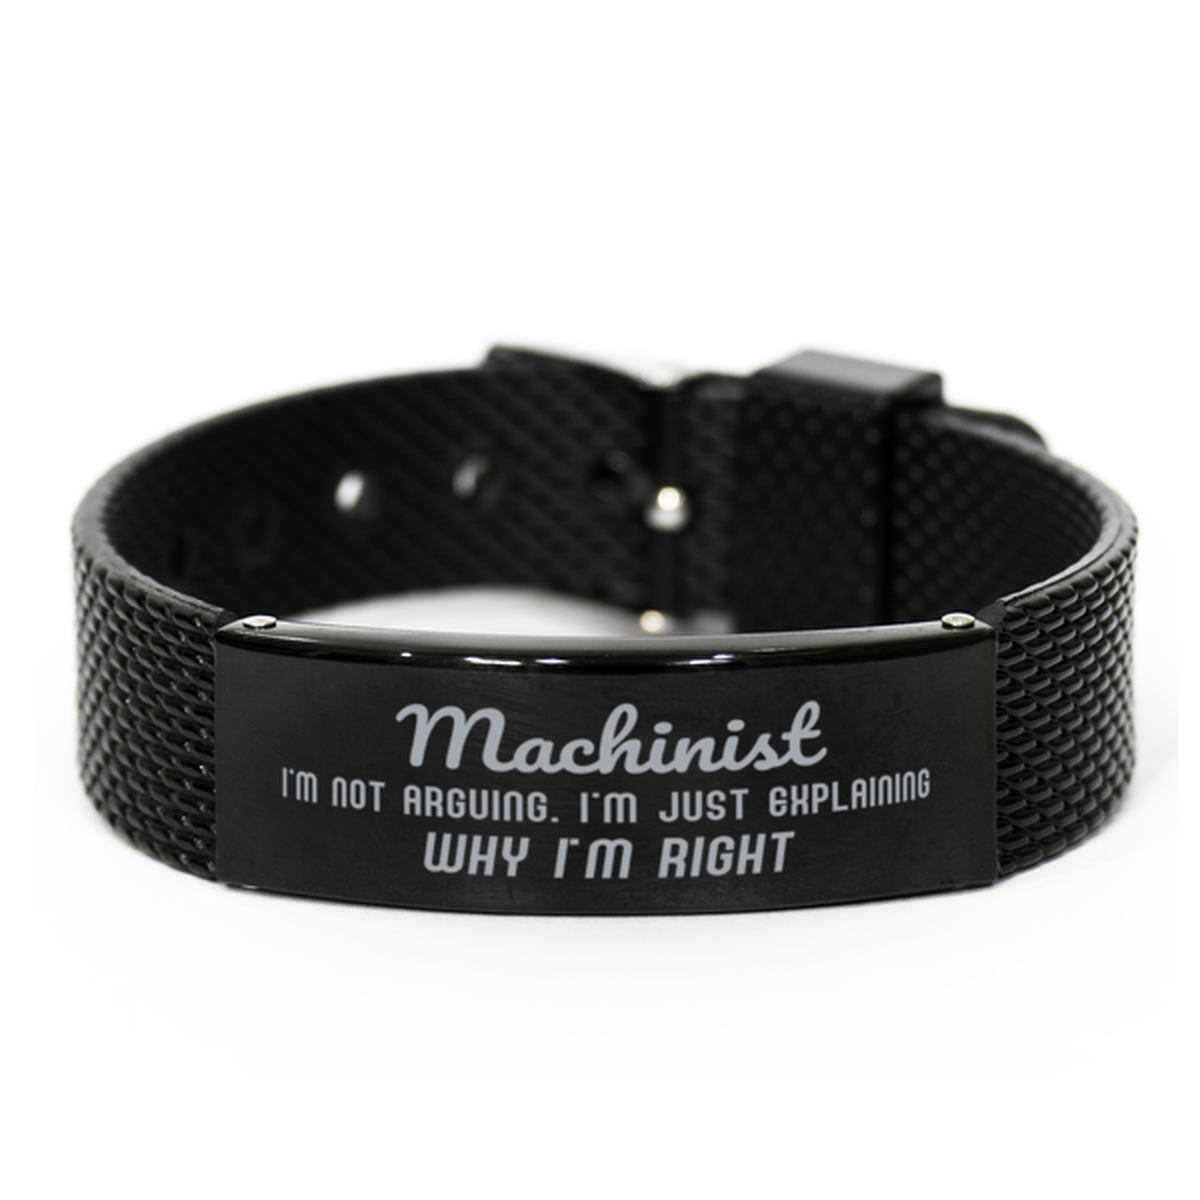 Machinist I'm not Arguing. I'm Just Explaining Why I'm RIGHT Black Shark Mesh Bracelet, Funny Saying Quote Machinist Gifts For Machinist Graduation Birthday Christmas Gifts for Men Women Coworker